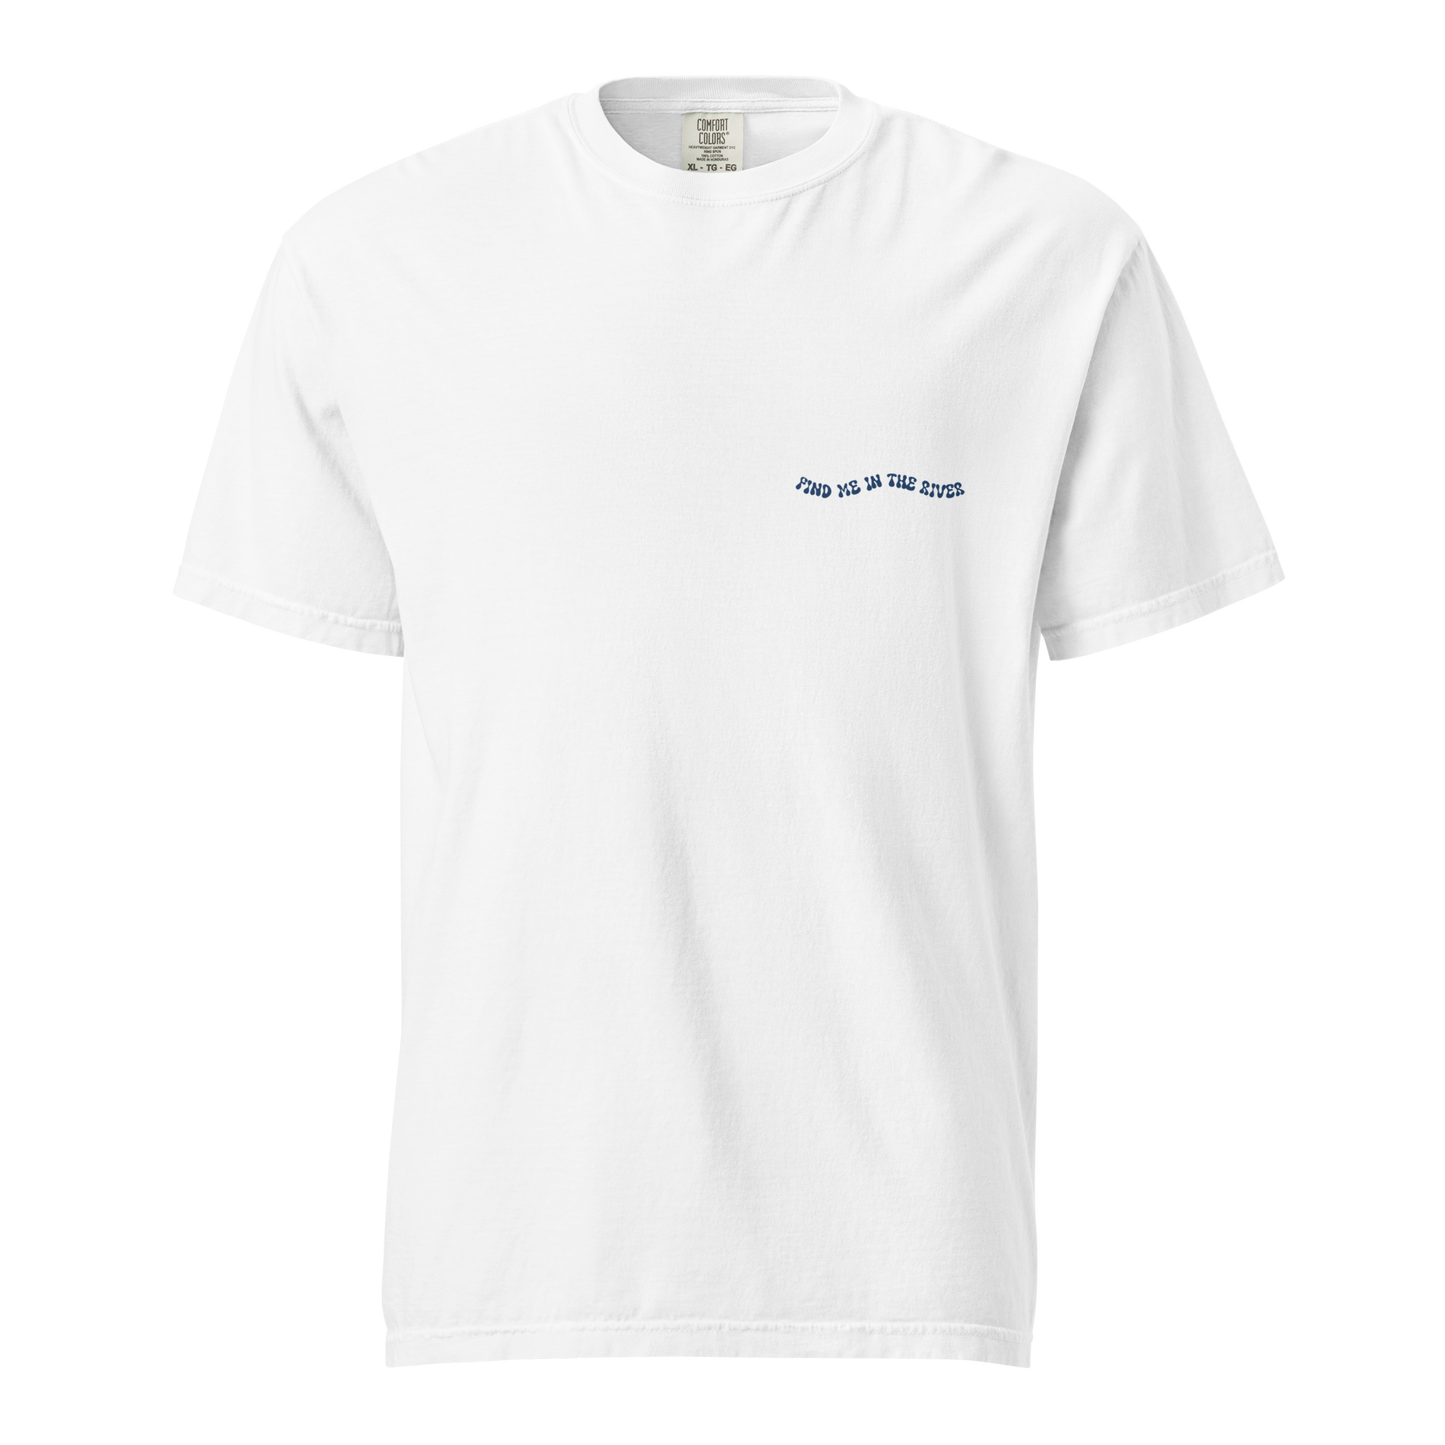 Find Me in the River - Comfort Colors Tee